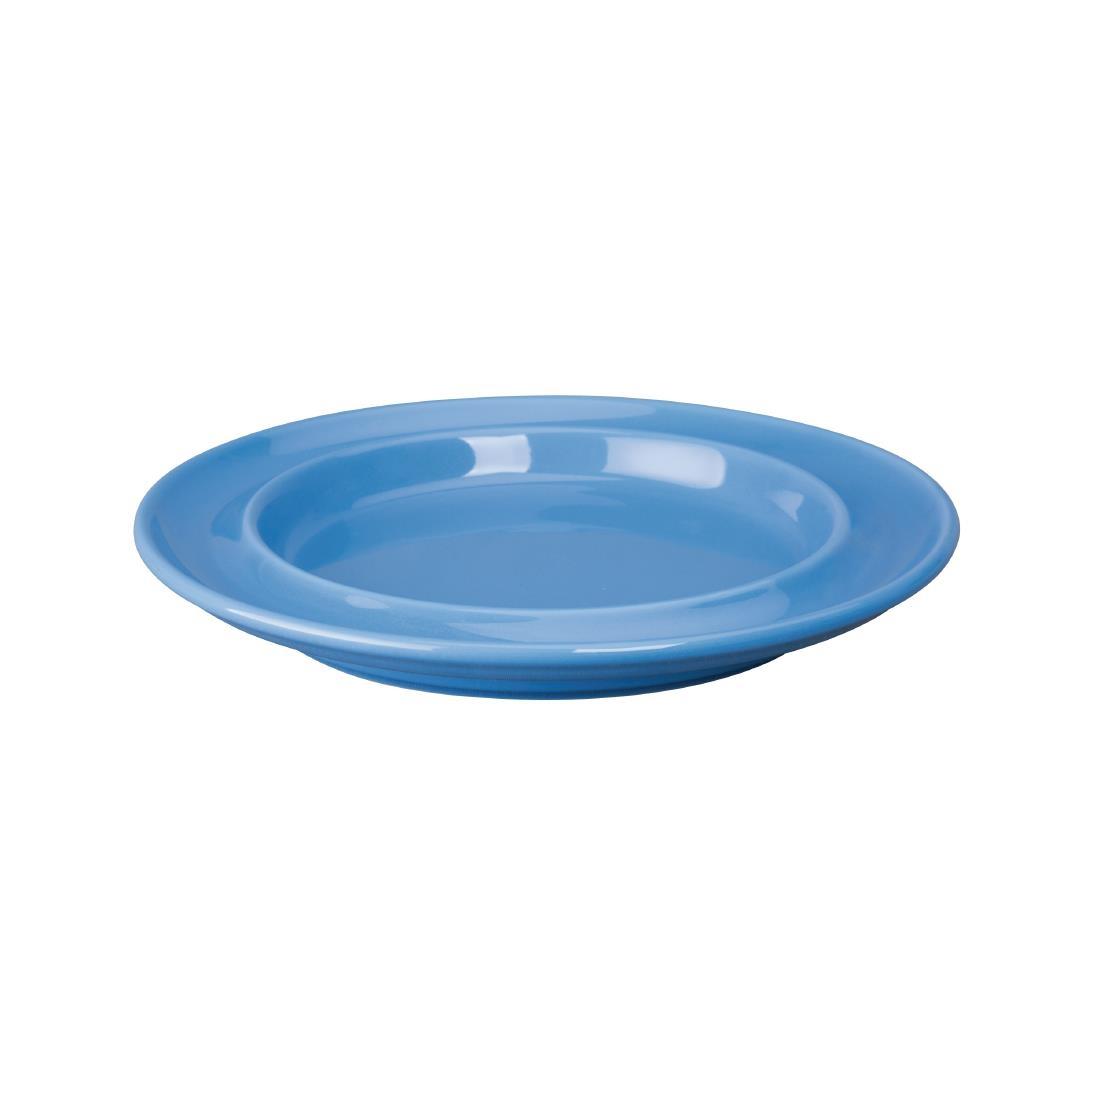 Olympia Heritage Raised Rim Plates Blue 203mm (Pack of 4) - DW140  - 2